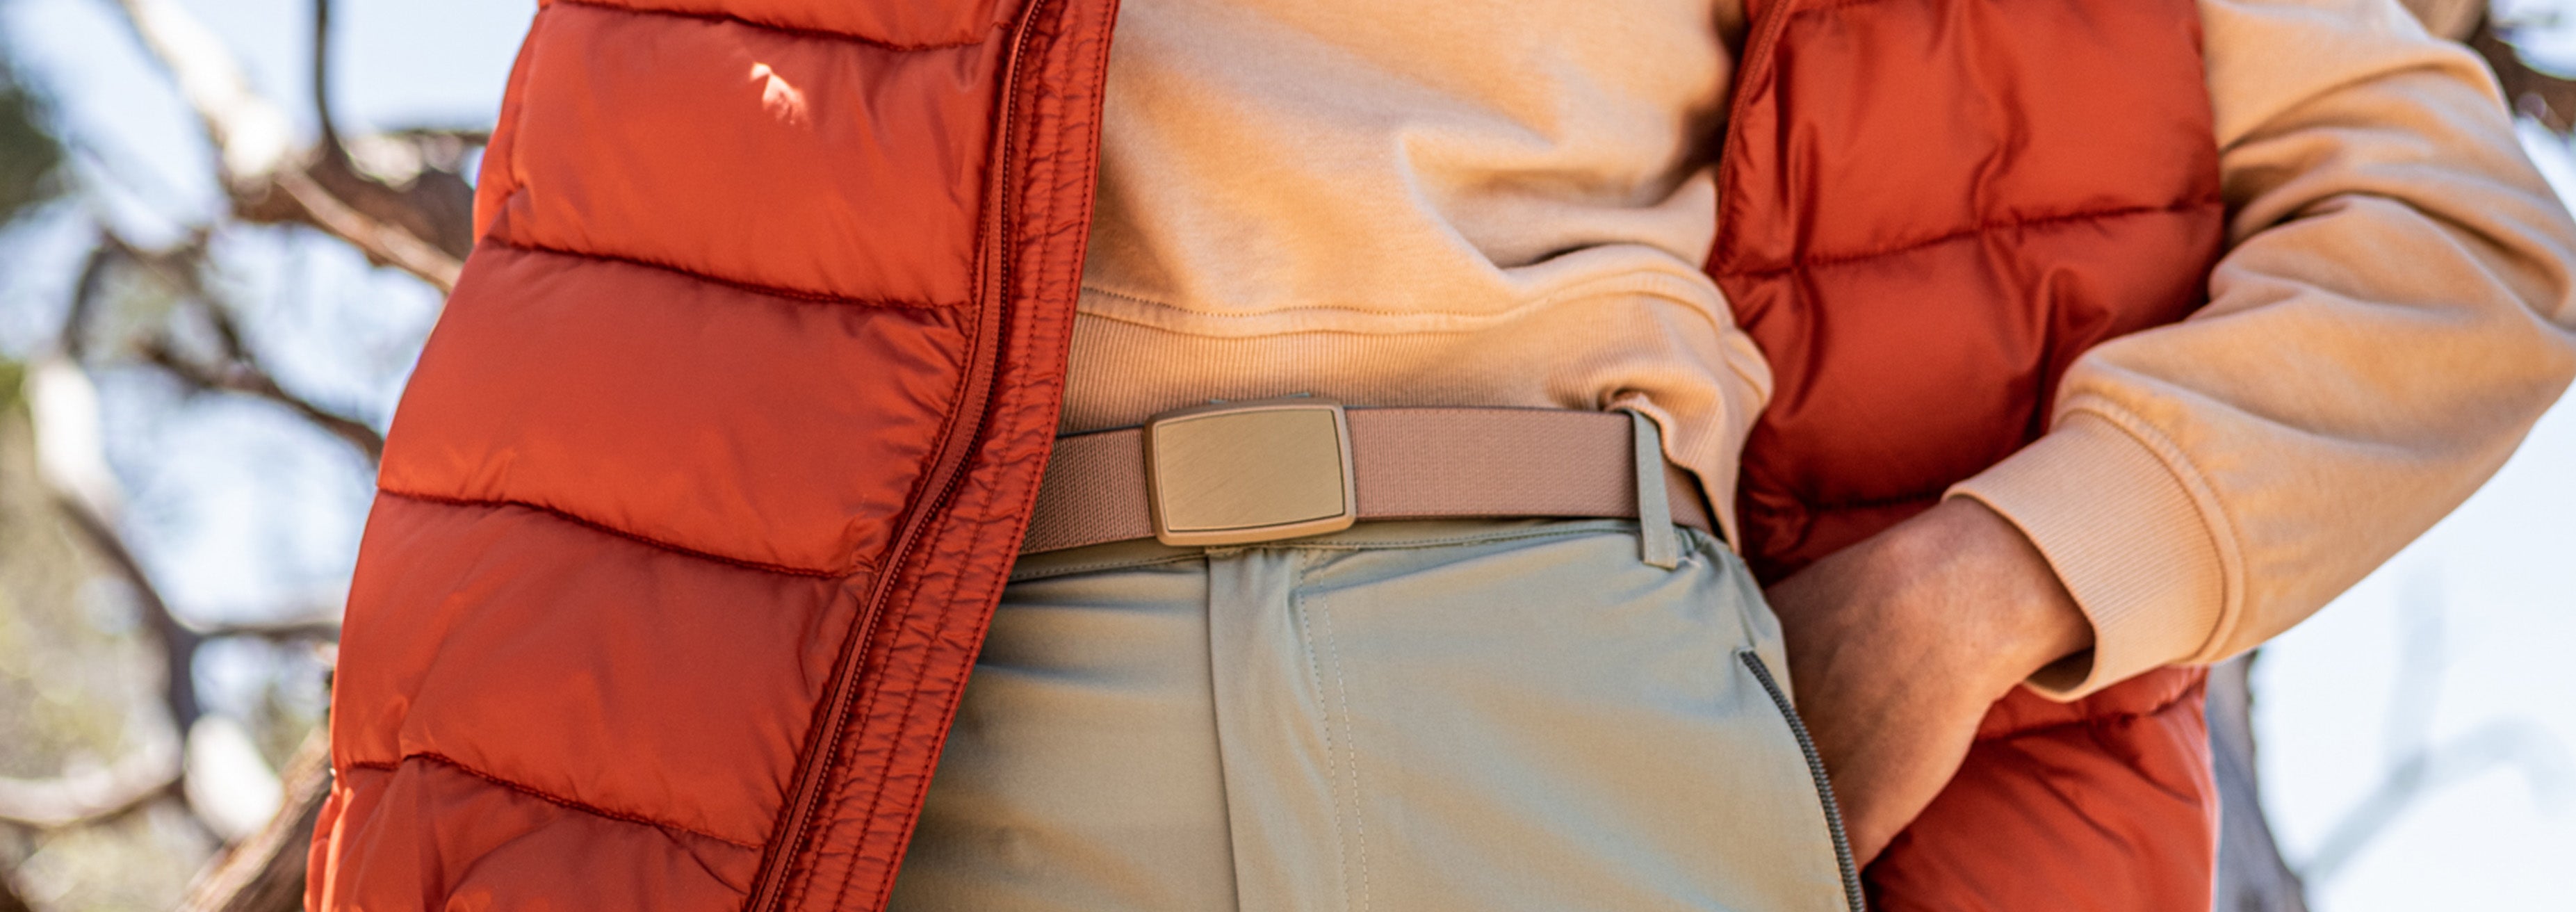 Groove Belt Low Profile - Taupe/Gold lifestyle image 1